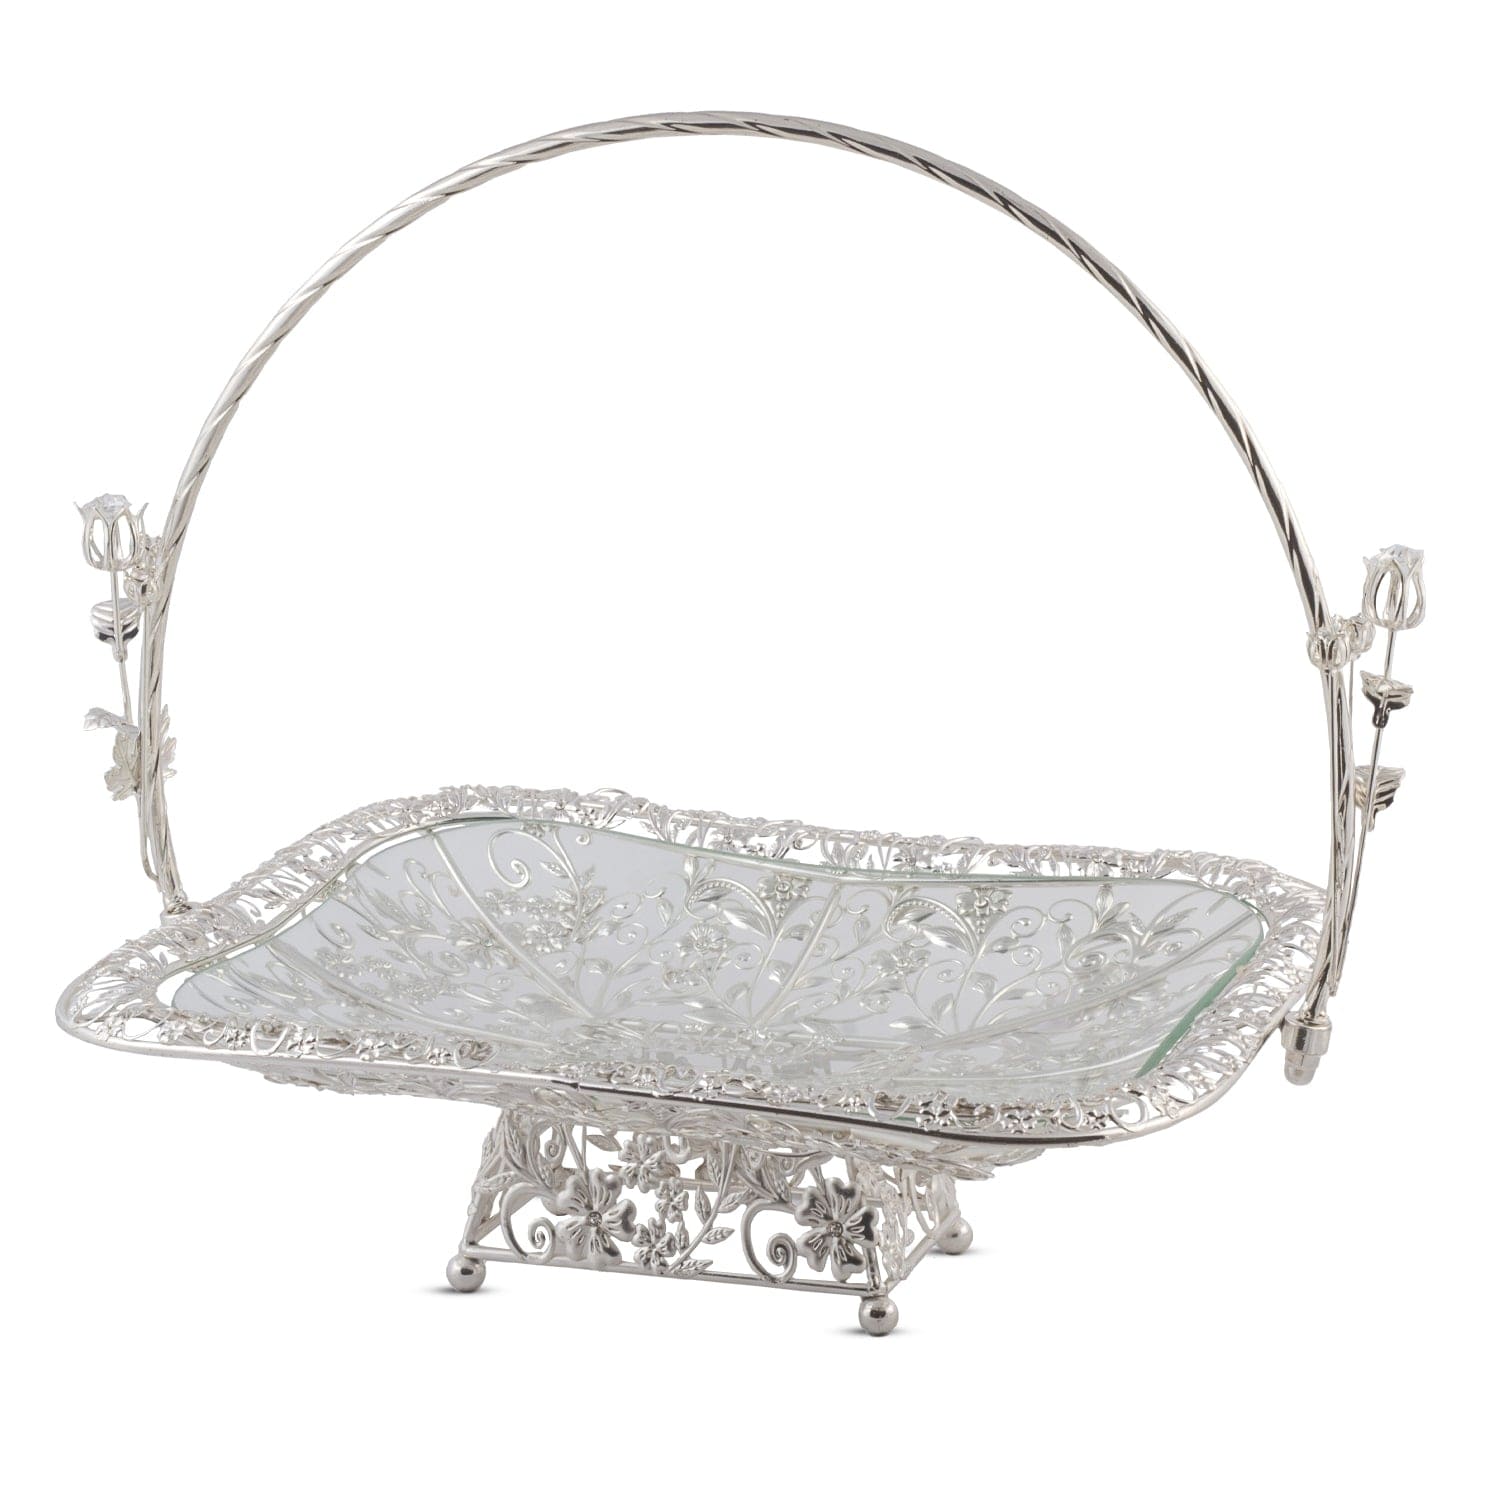 Red Butler dining_decor Silver Rectangle Tray SWRT0SG18Y18A1 GSRT18A1 Redbutler